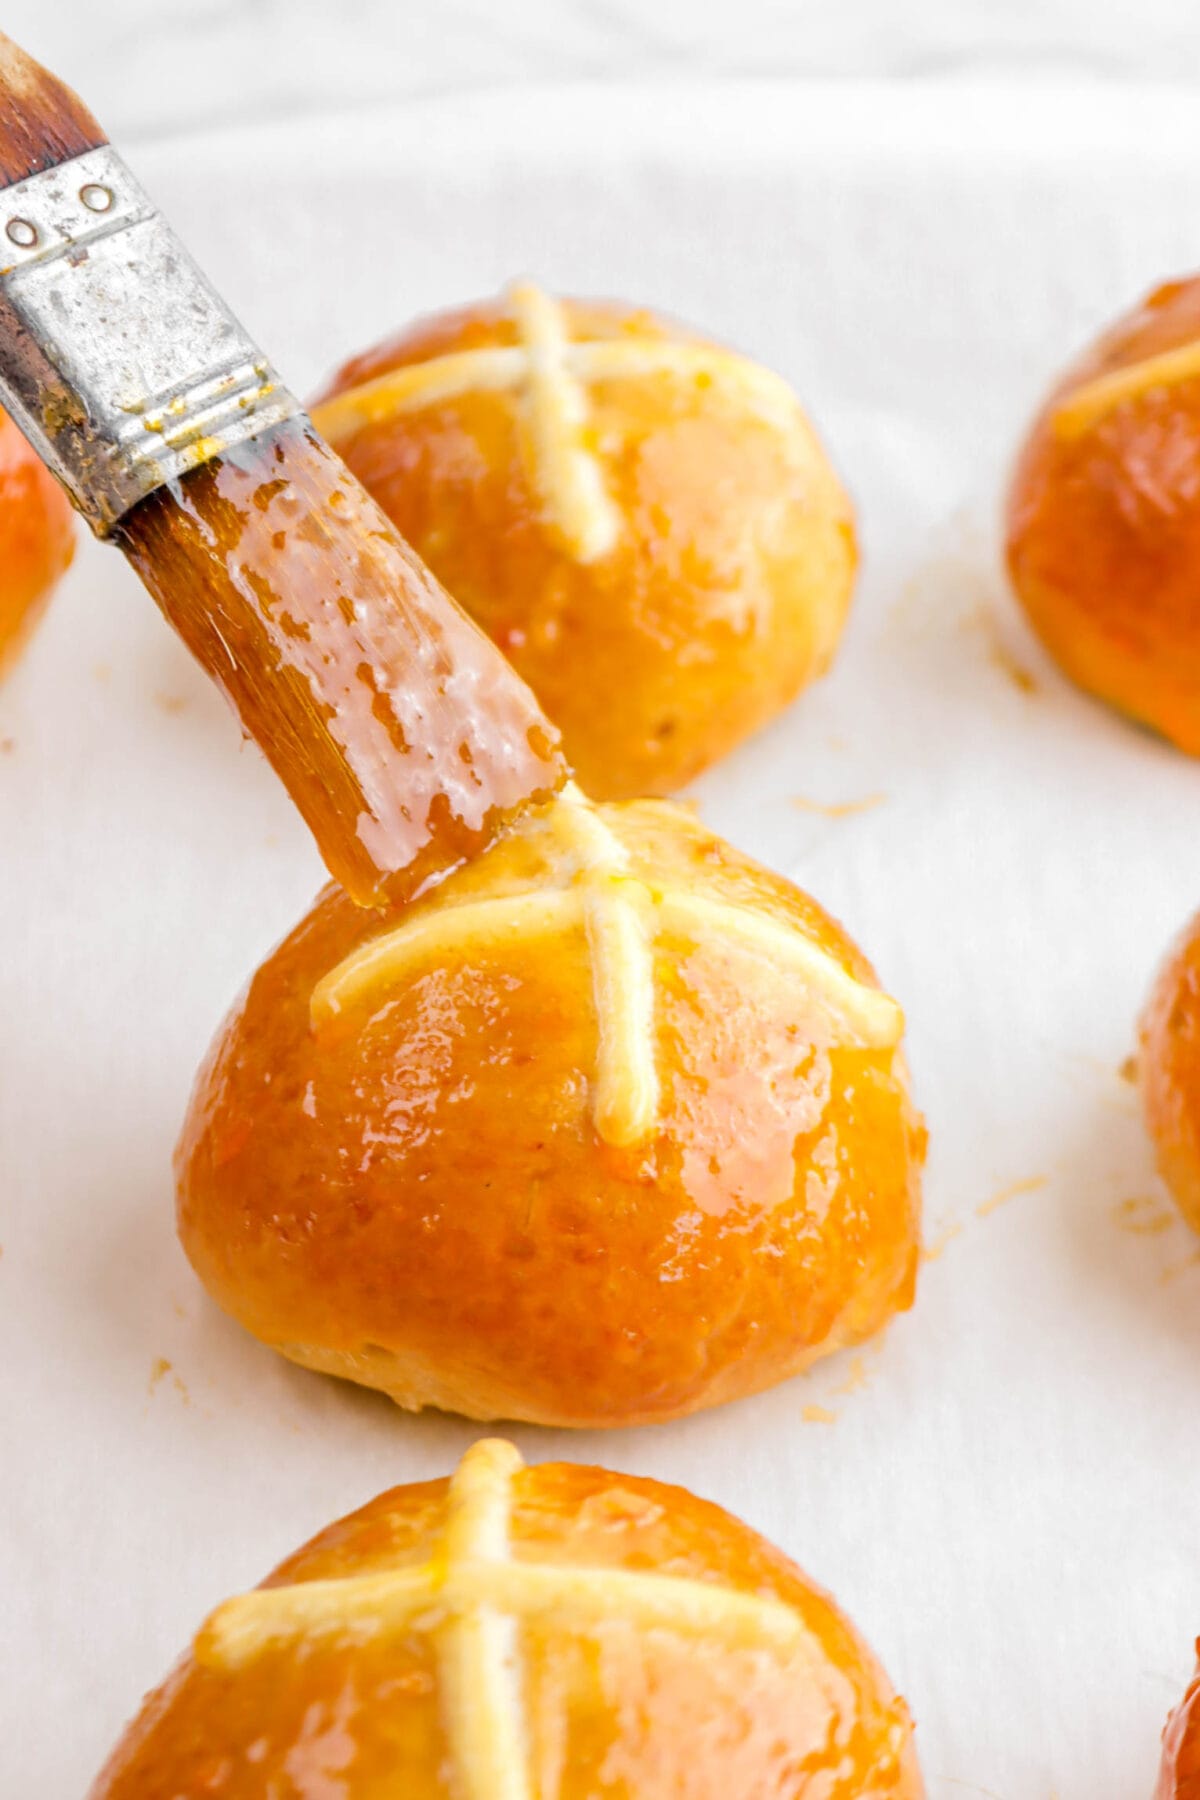 hot cross bun being brushed with apricot jam